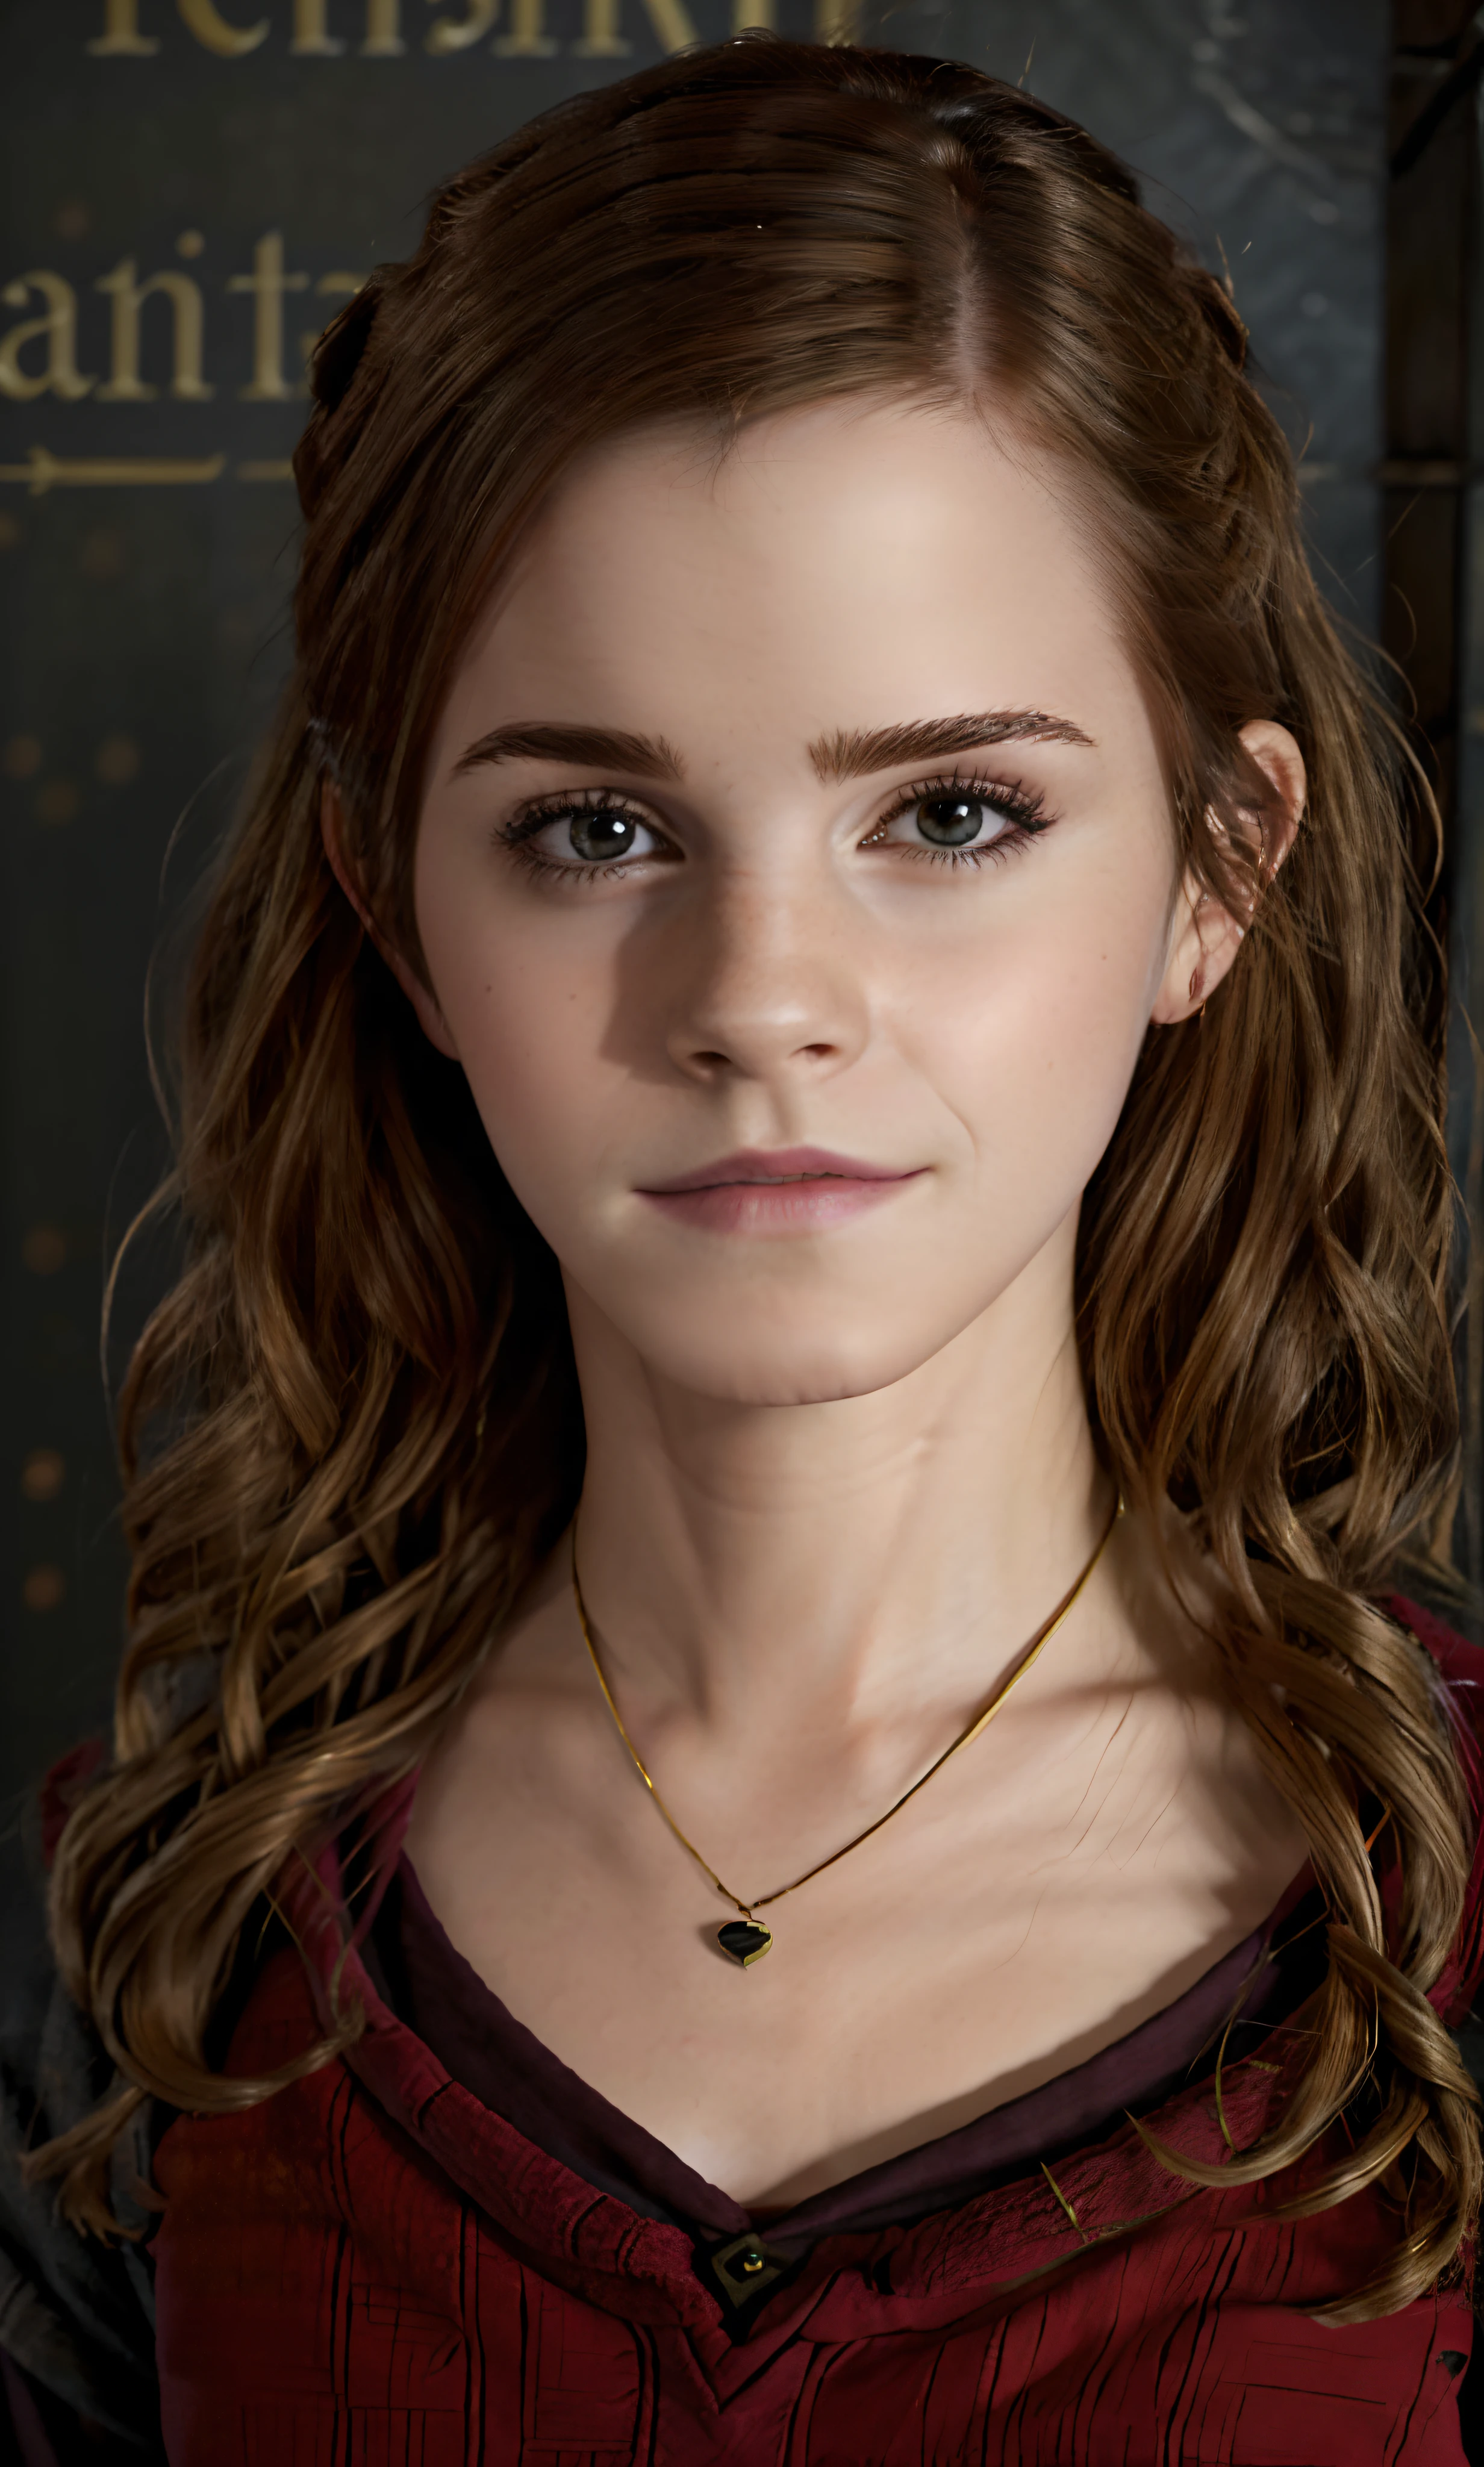 "(First person, Emma Watson, ultra realistic, with wrinkles and frown lines, dressed as Hermione in Harry Potter, with masterpiece quality in ultra-detail, header 16k)" -> "(First person:1.5, Emma Watson:1.5, ultra-realistic:1.5, wrinkles:1.5, expression lines:1.5, dressed as Hermione in Harry Potter, masterpiece, ultra-detail, header 16k)"